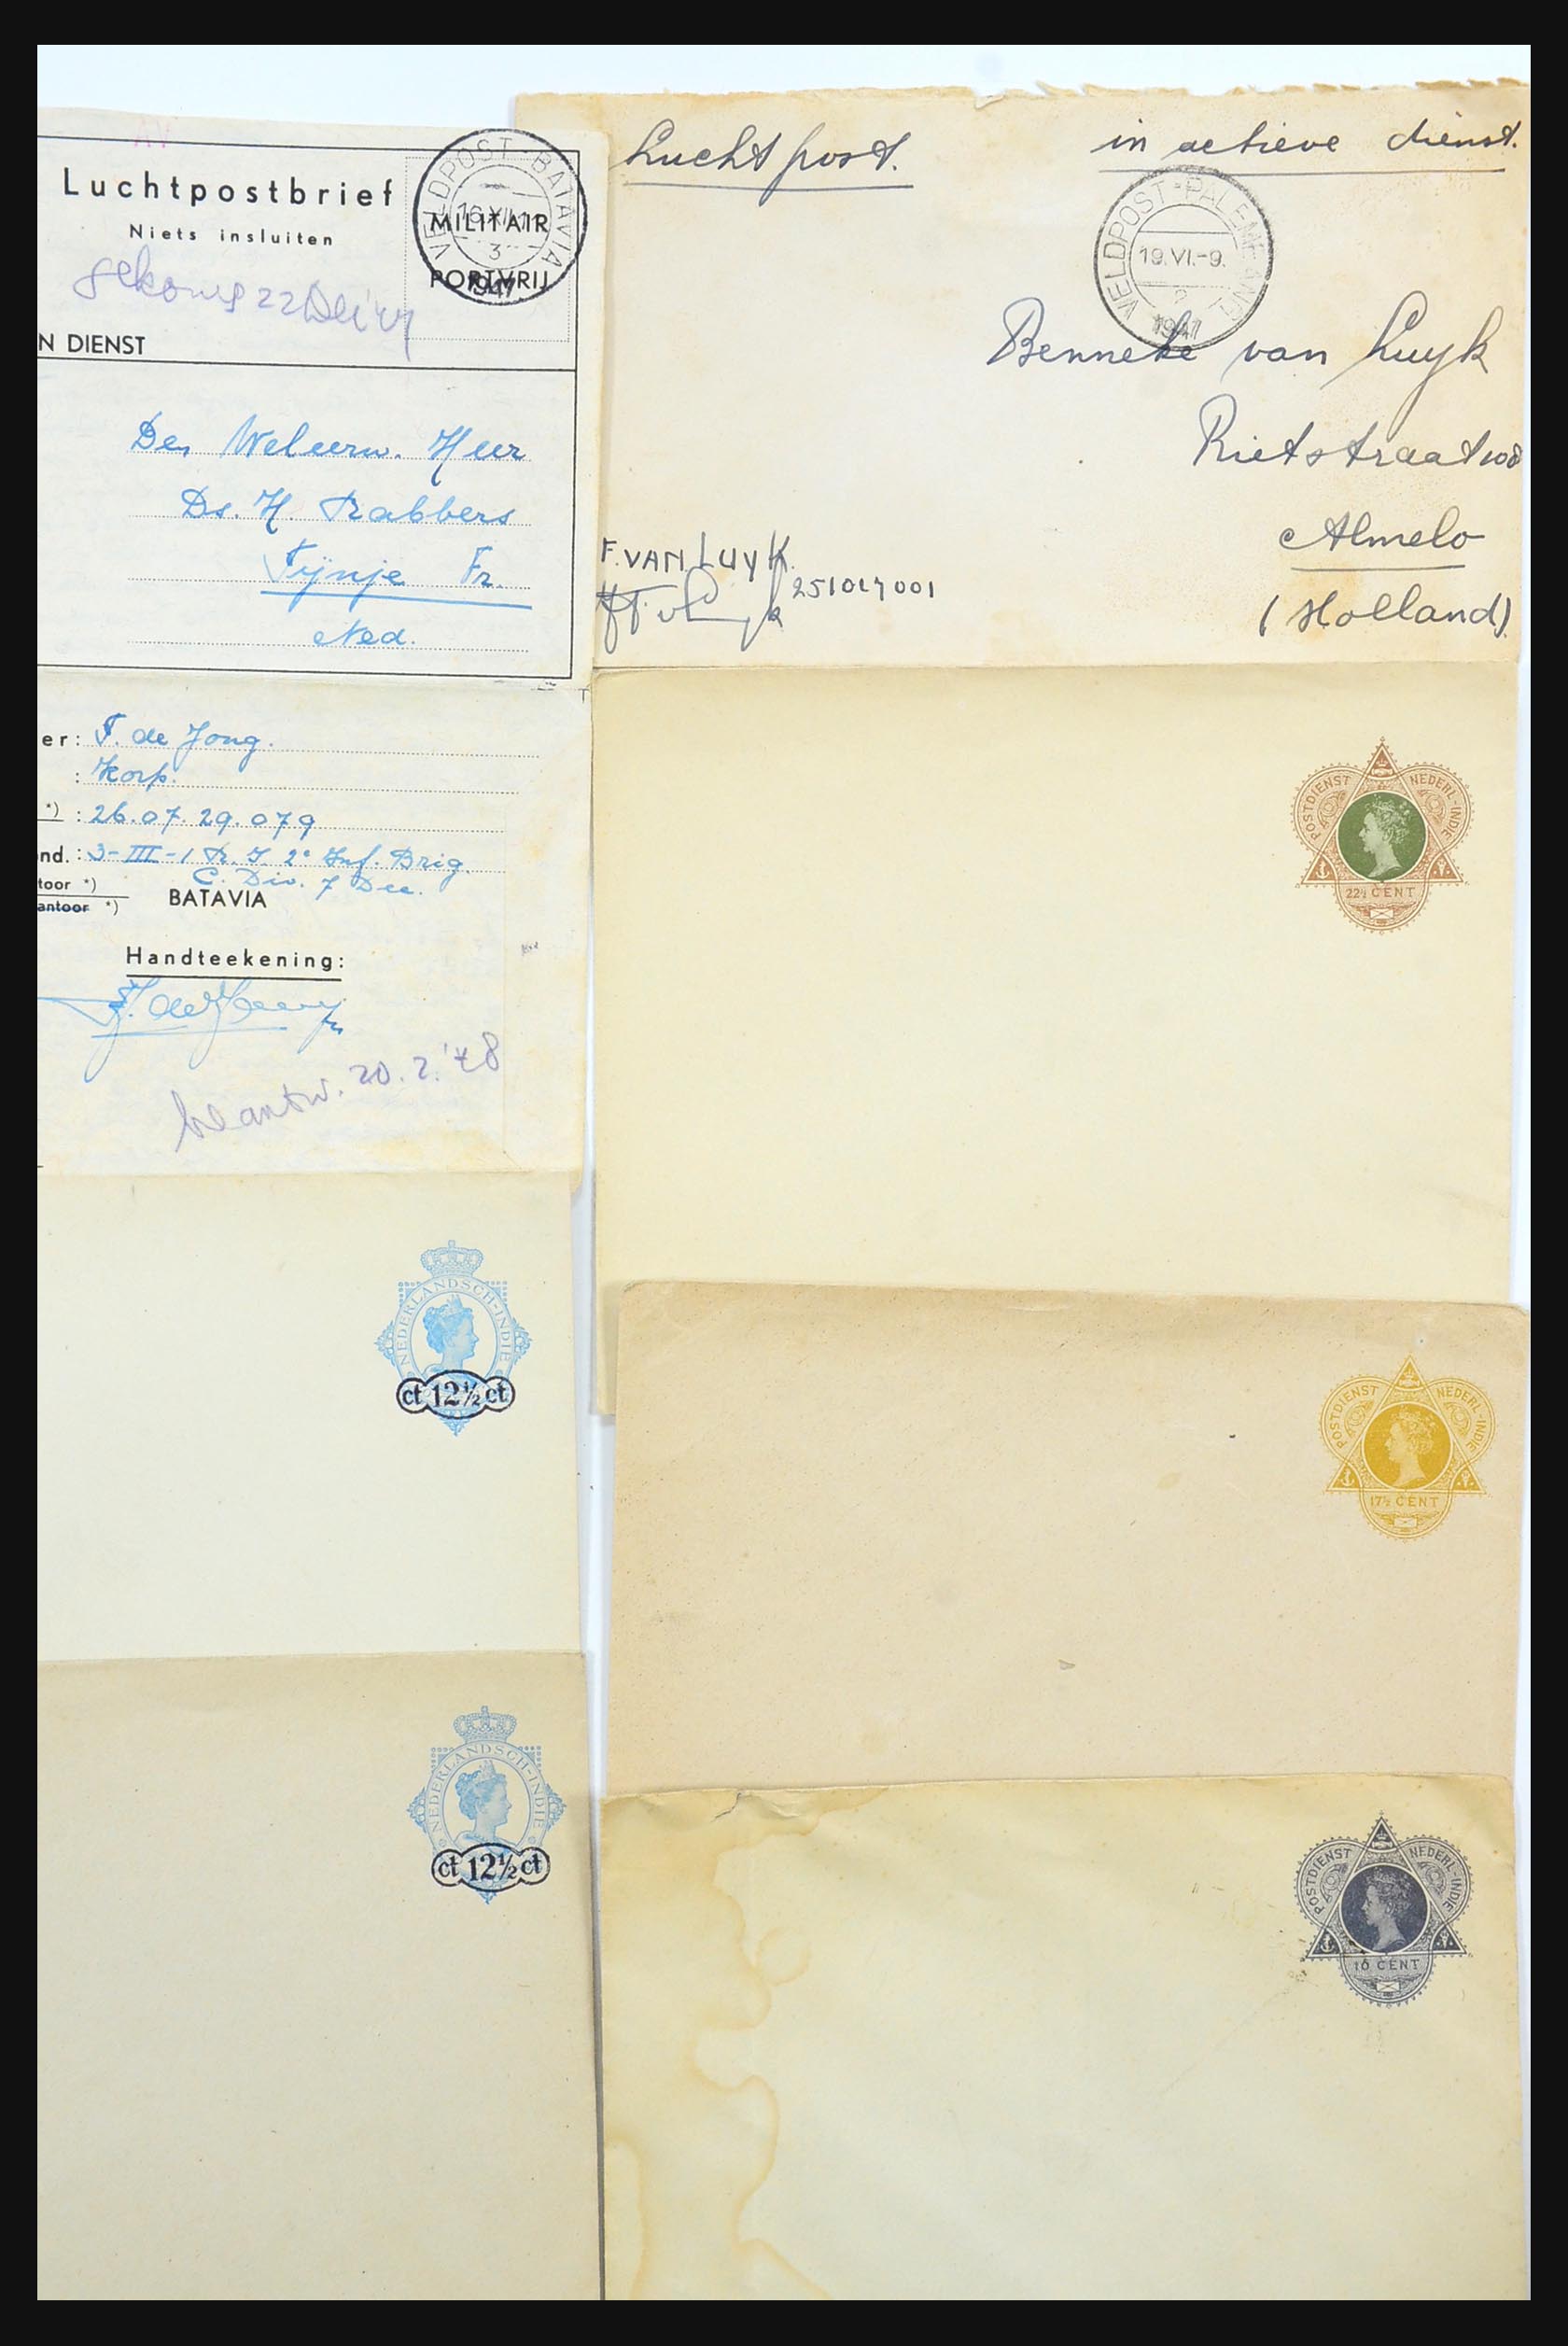 31361 039 - 31361 Netherlands Indies covers 1880-1950.